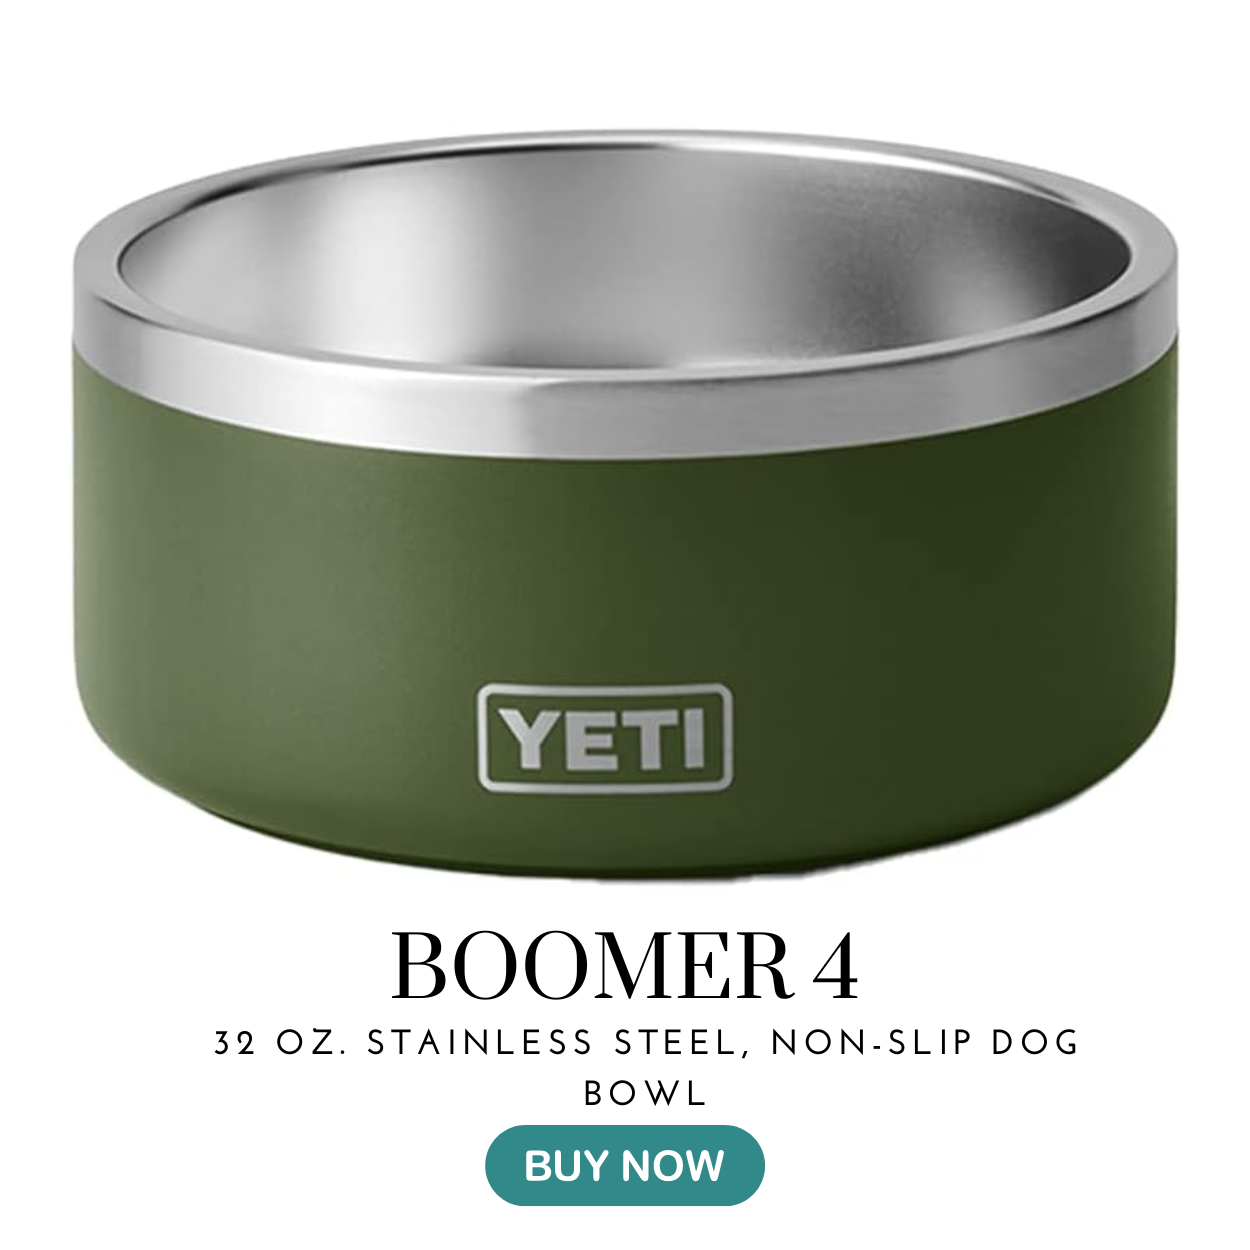 Yeti's Top 5 Mother’s Day Gifts with Free Customization